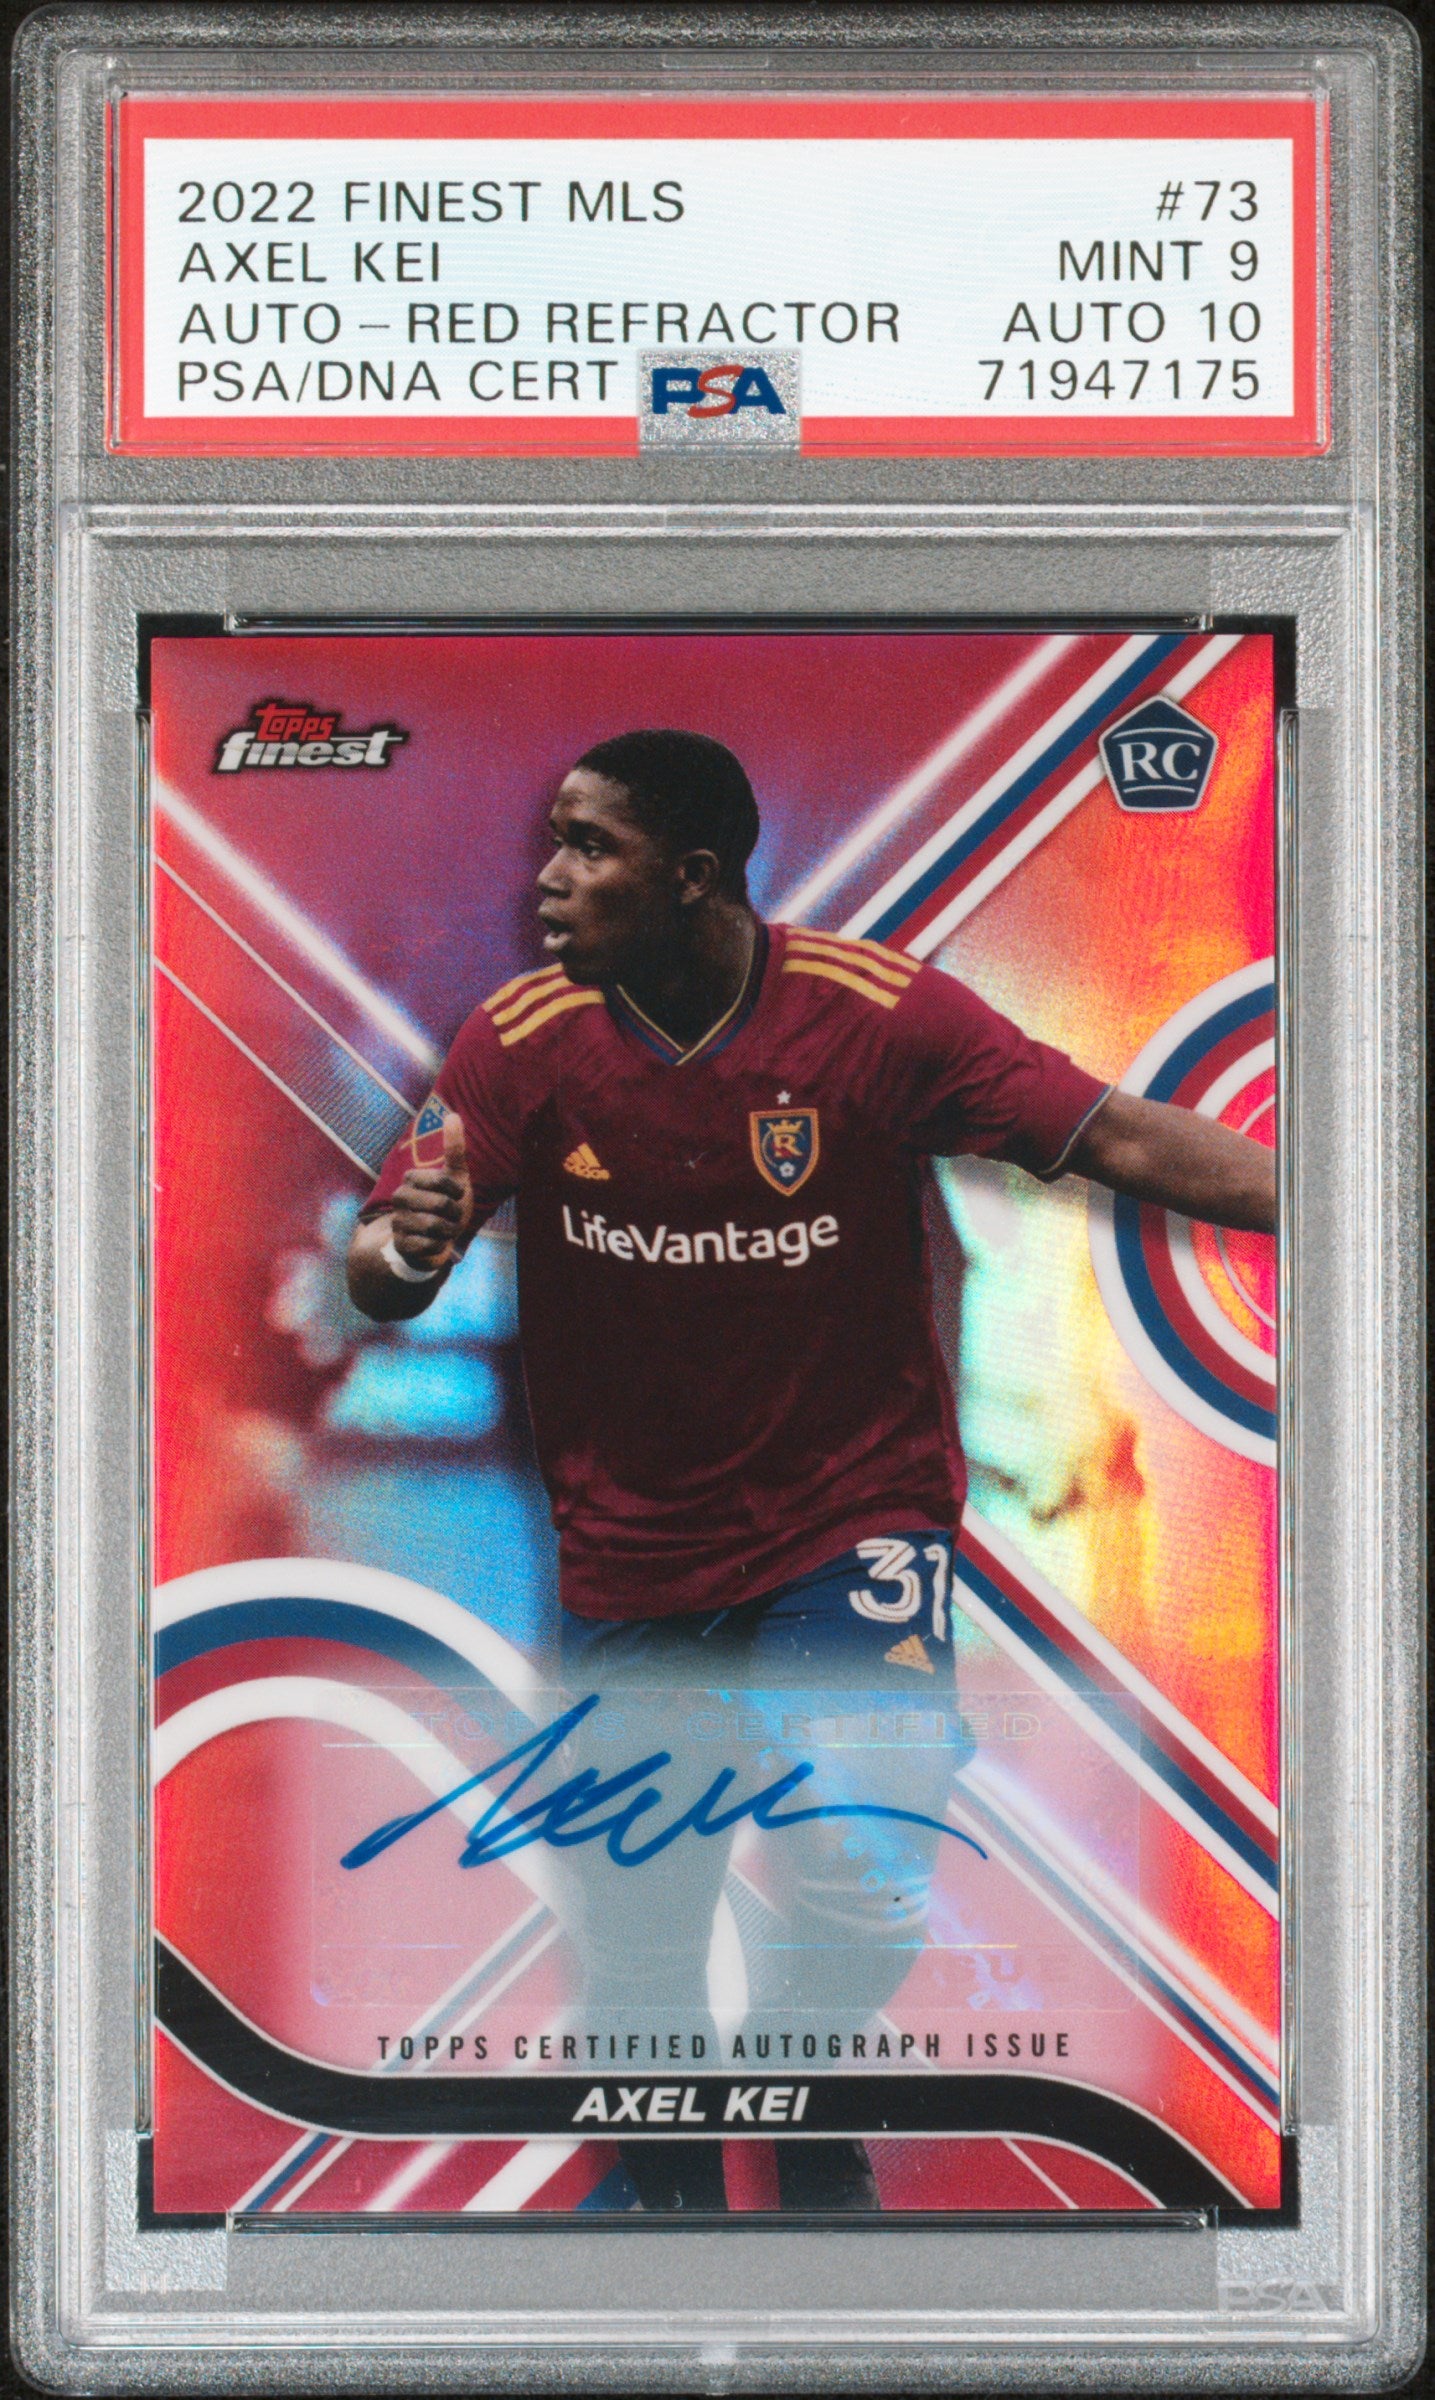 2022 TOPPS FINEST MLS AXEL KEI RED REFRACTOR 2/5 PSA 9 AUTO 10